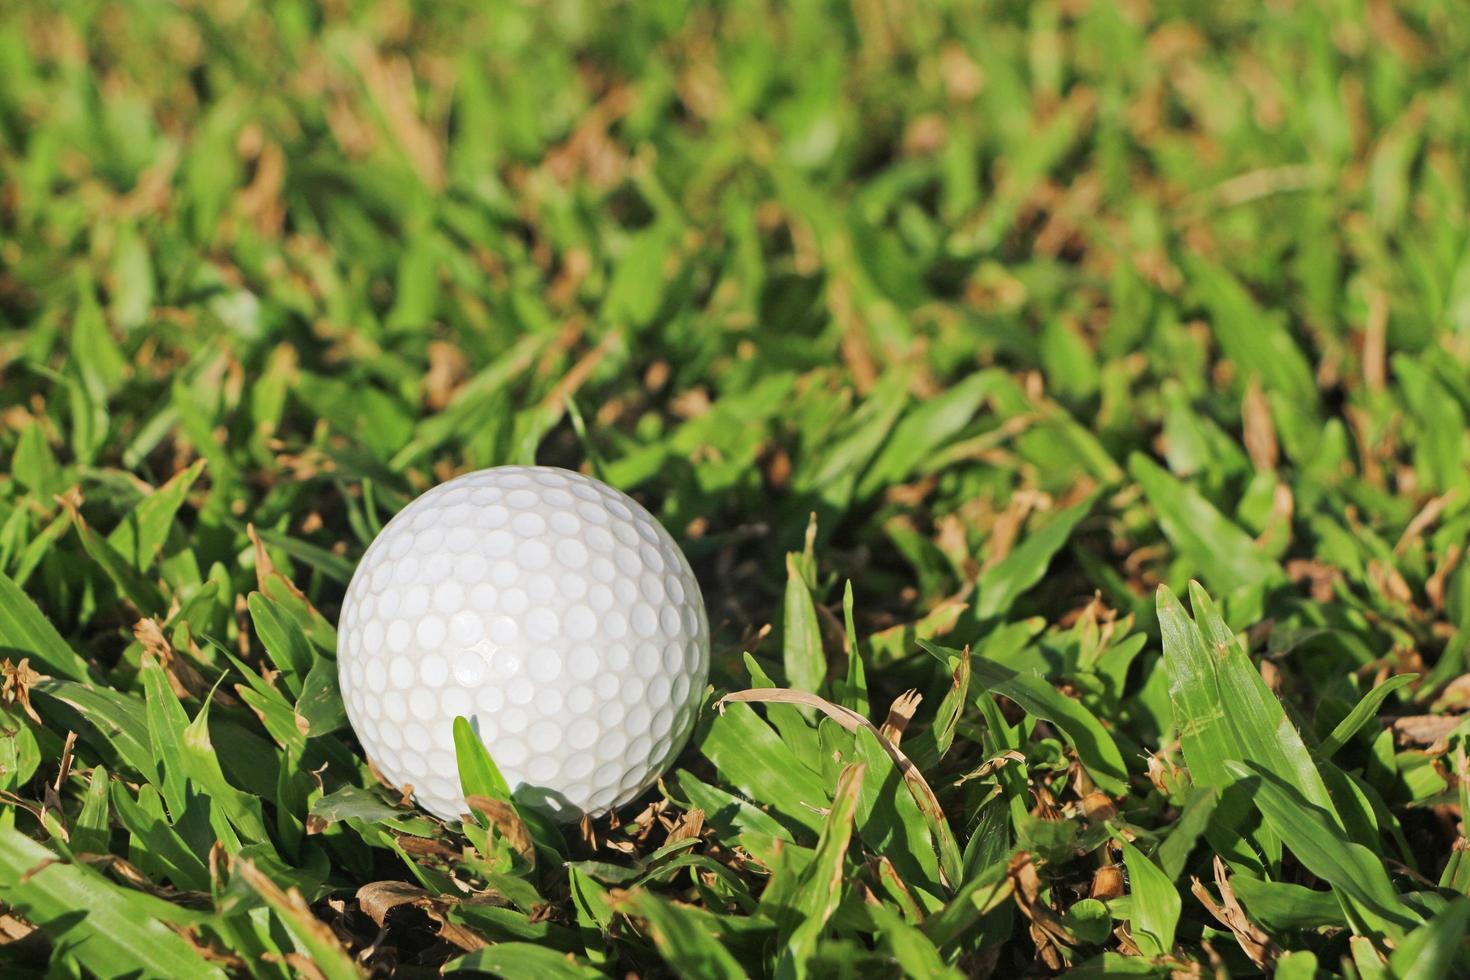 Close up to the golf ball on the green grass. photo